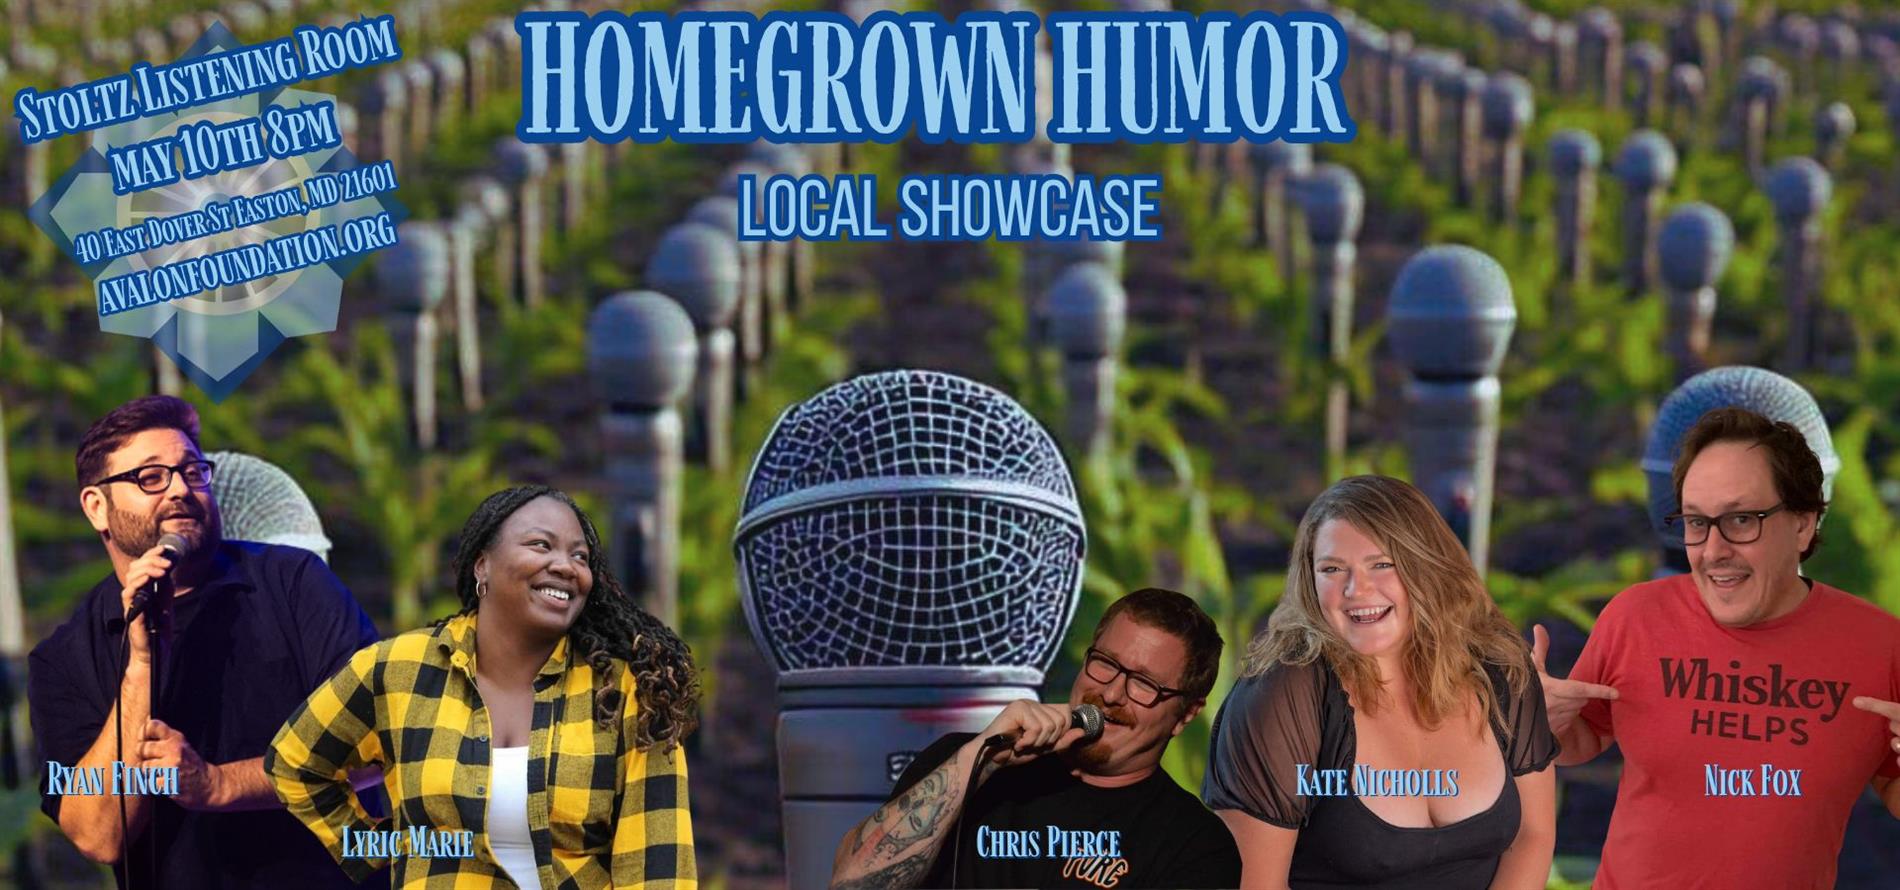 HOMEGROWN HUMOR: Local Comedy Showcase